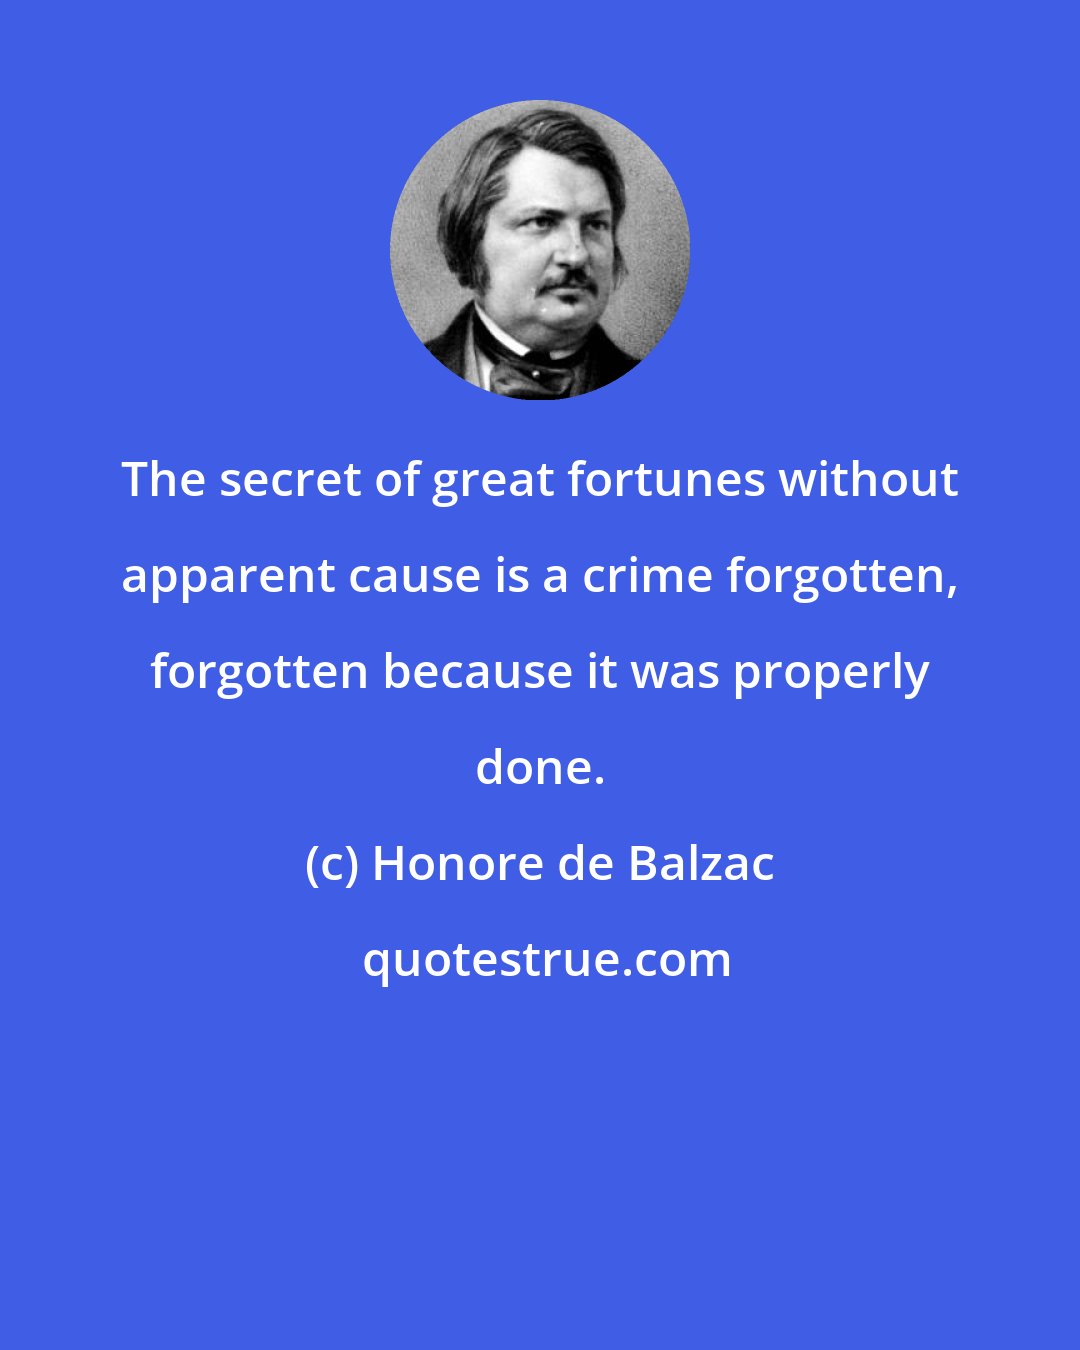 Honore de Balzac: The secret of great fortunes without apparent cause is a crime forgotten, forgotten because it was properly done.